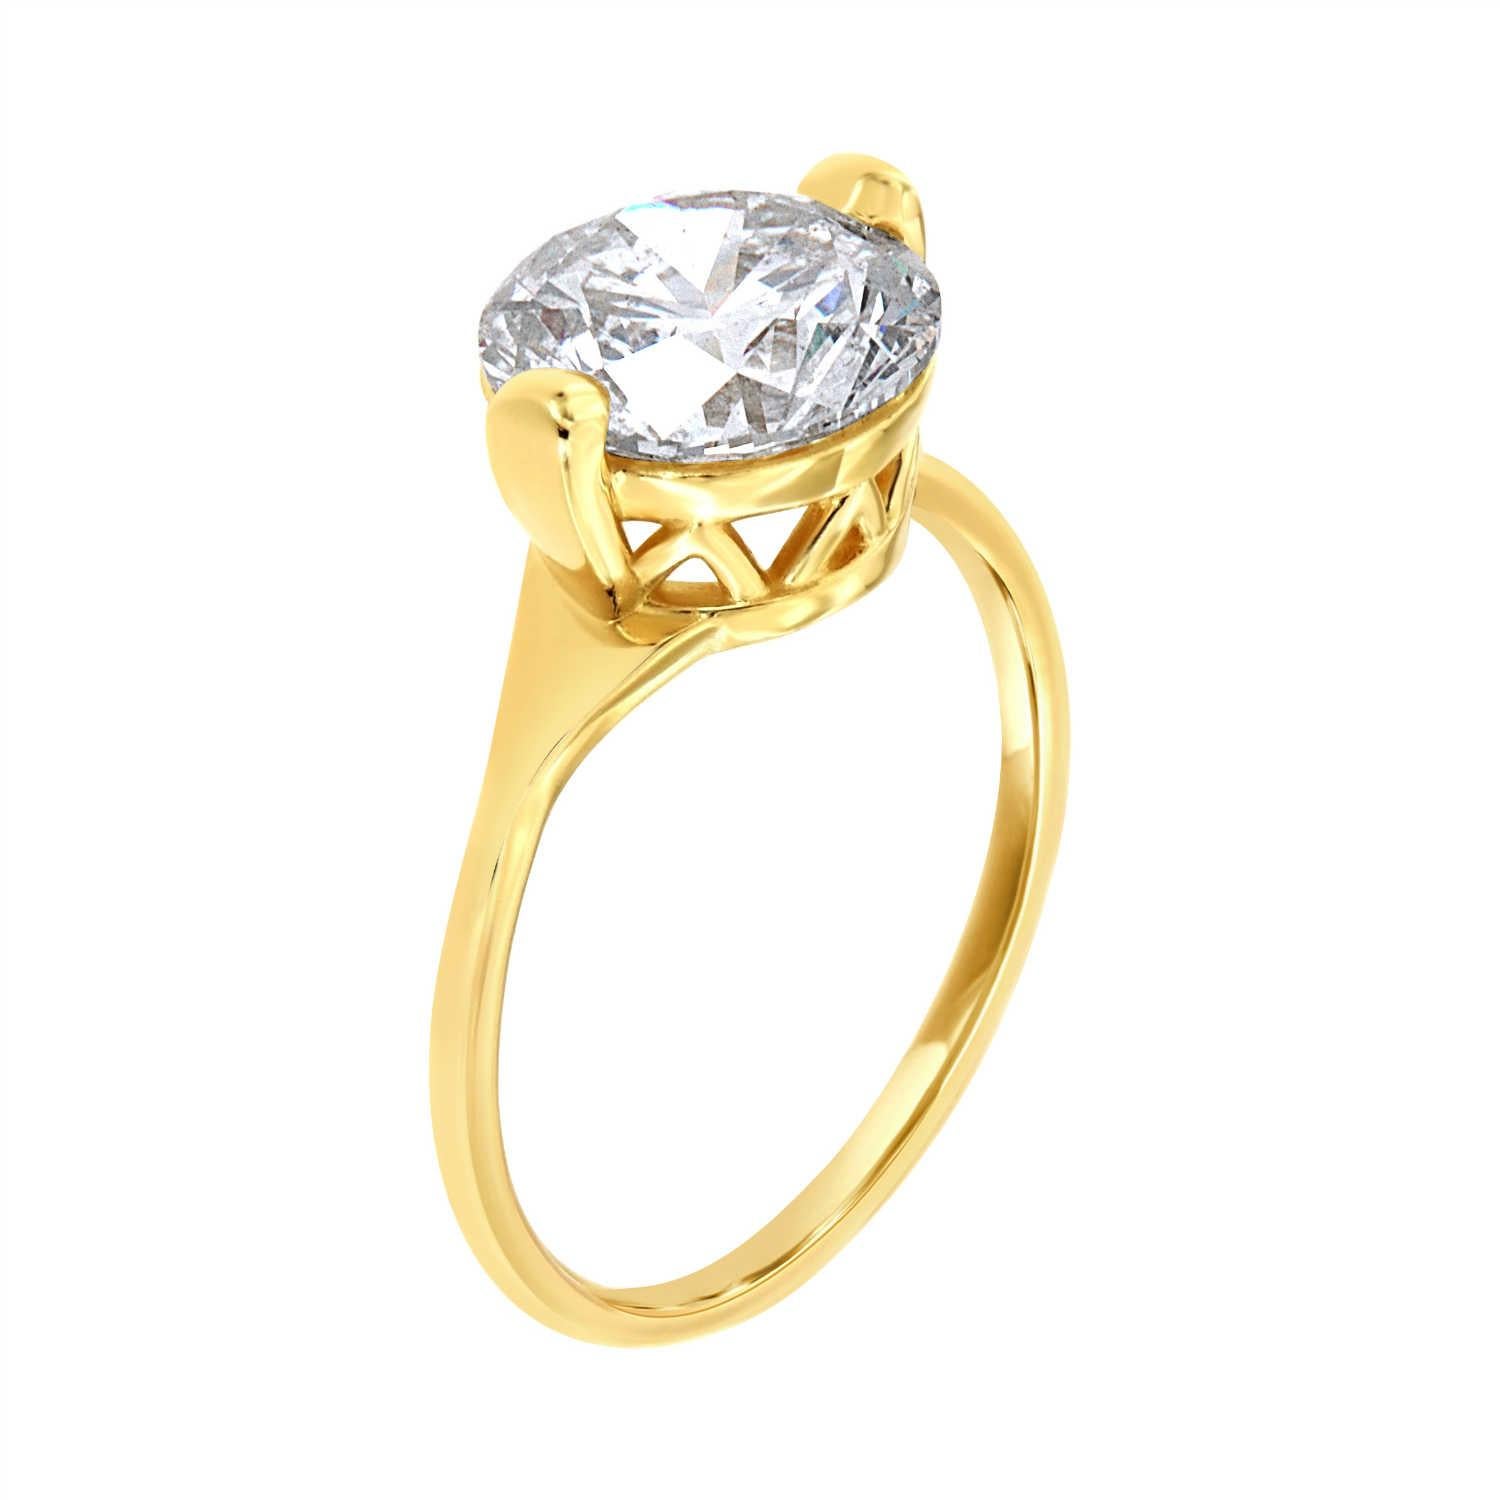 This unique 14k yellow gold solitaire setting features a 3.01-carat round diamond EGL USA certificate number: US 924372901D set in a crown with two prongs on top of a very delicate 1.4mm wide band. The EGL Graded this diamond as G in color and SI3